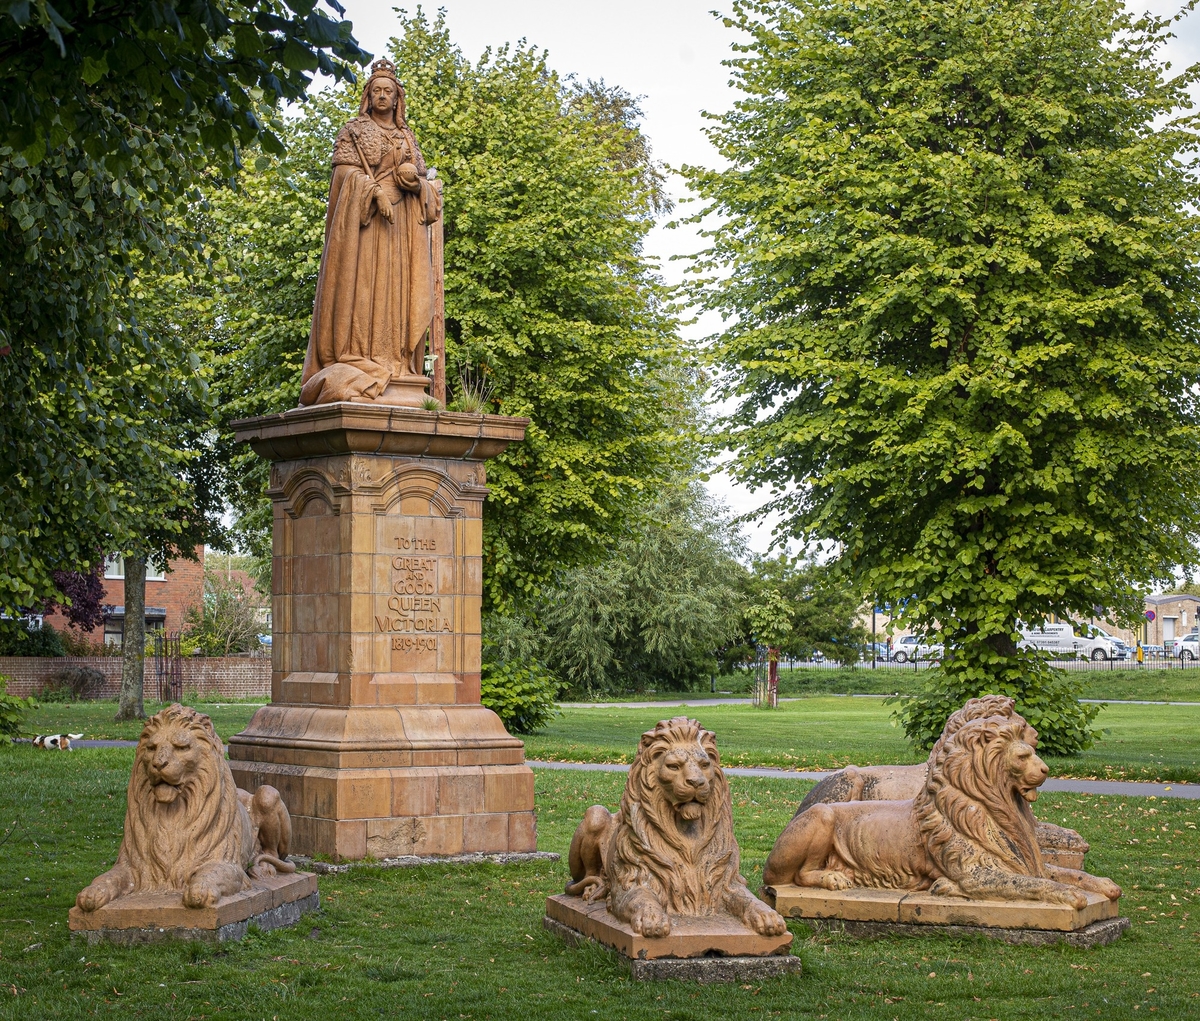 Queen Victoria (and Lions)